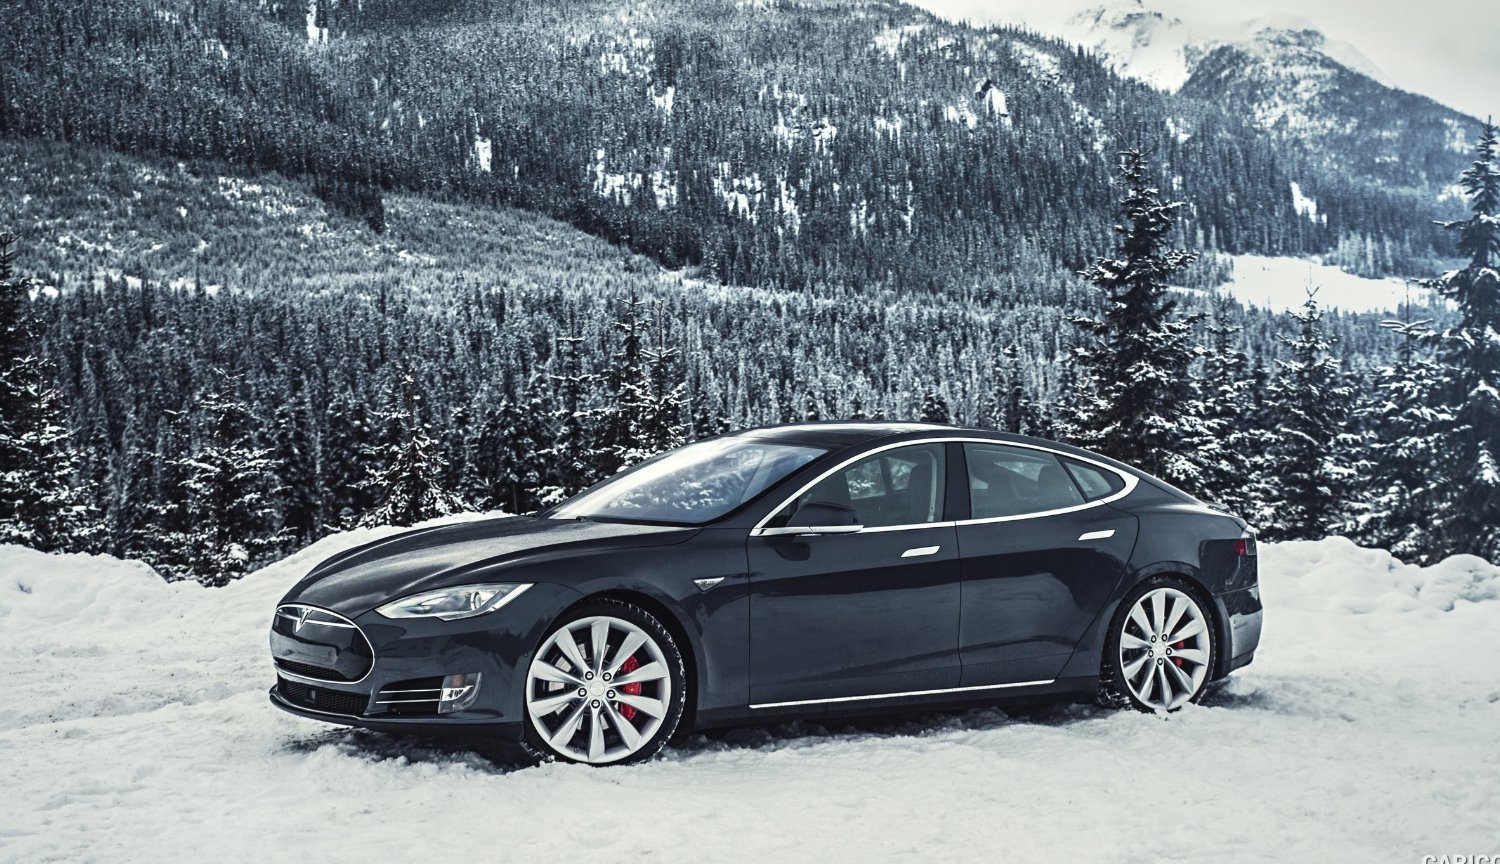 #video | How does the Tesla autopilot in snowy weather?